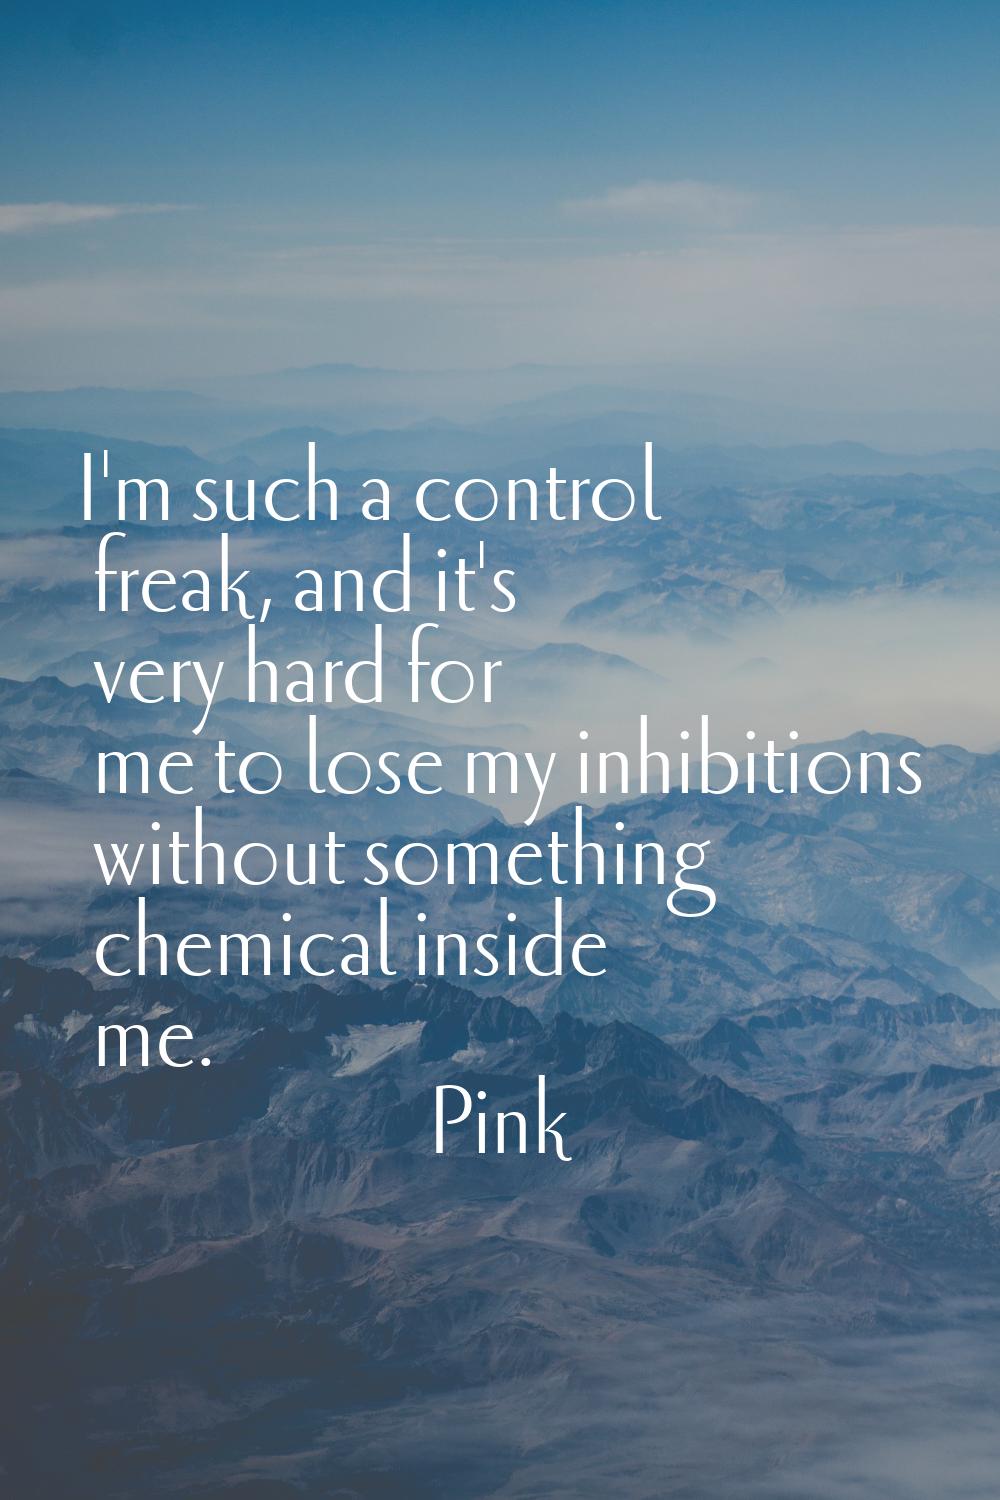 I'm such a control freak, and it's very hard for me to lose my inhibitions without something chemic